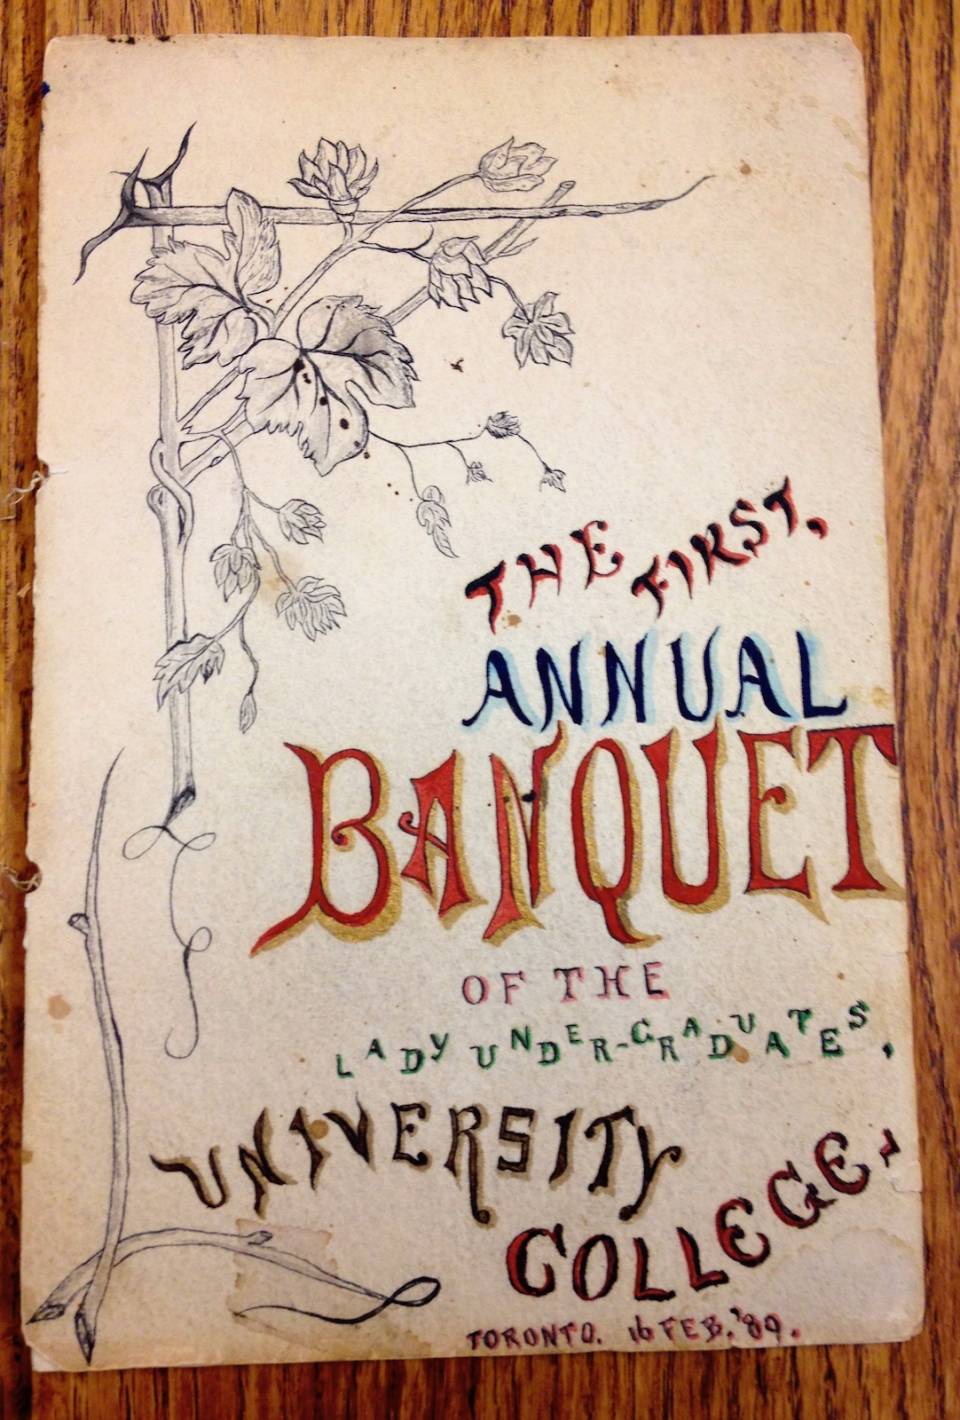 Programme cover illustrated with leaves, with these handwritten words: "THE FIRST ANNUAL BANQUET OF THE LADY UNDERGRADUATES UNIVERSITY COLLEGE TORONTO 16 FEB. '89"